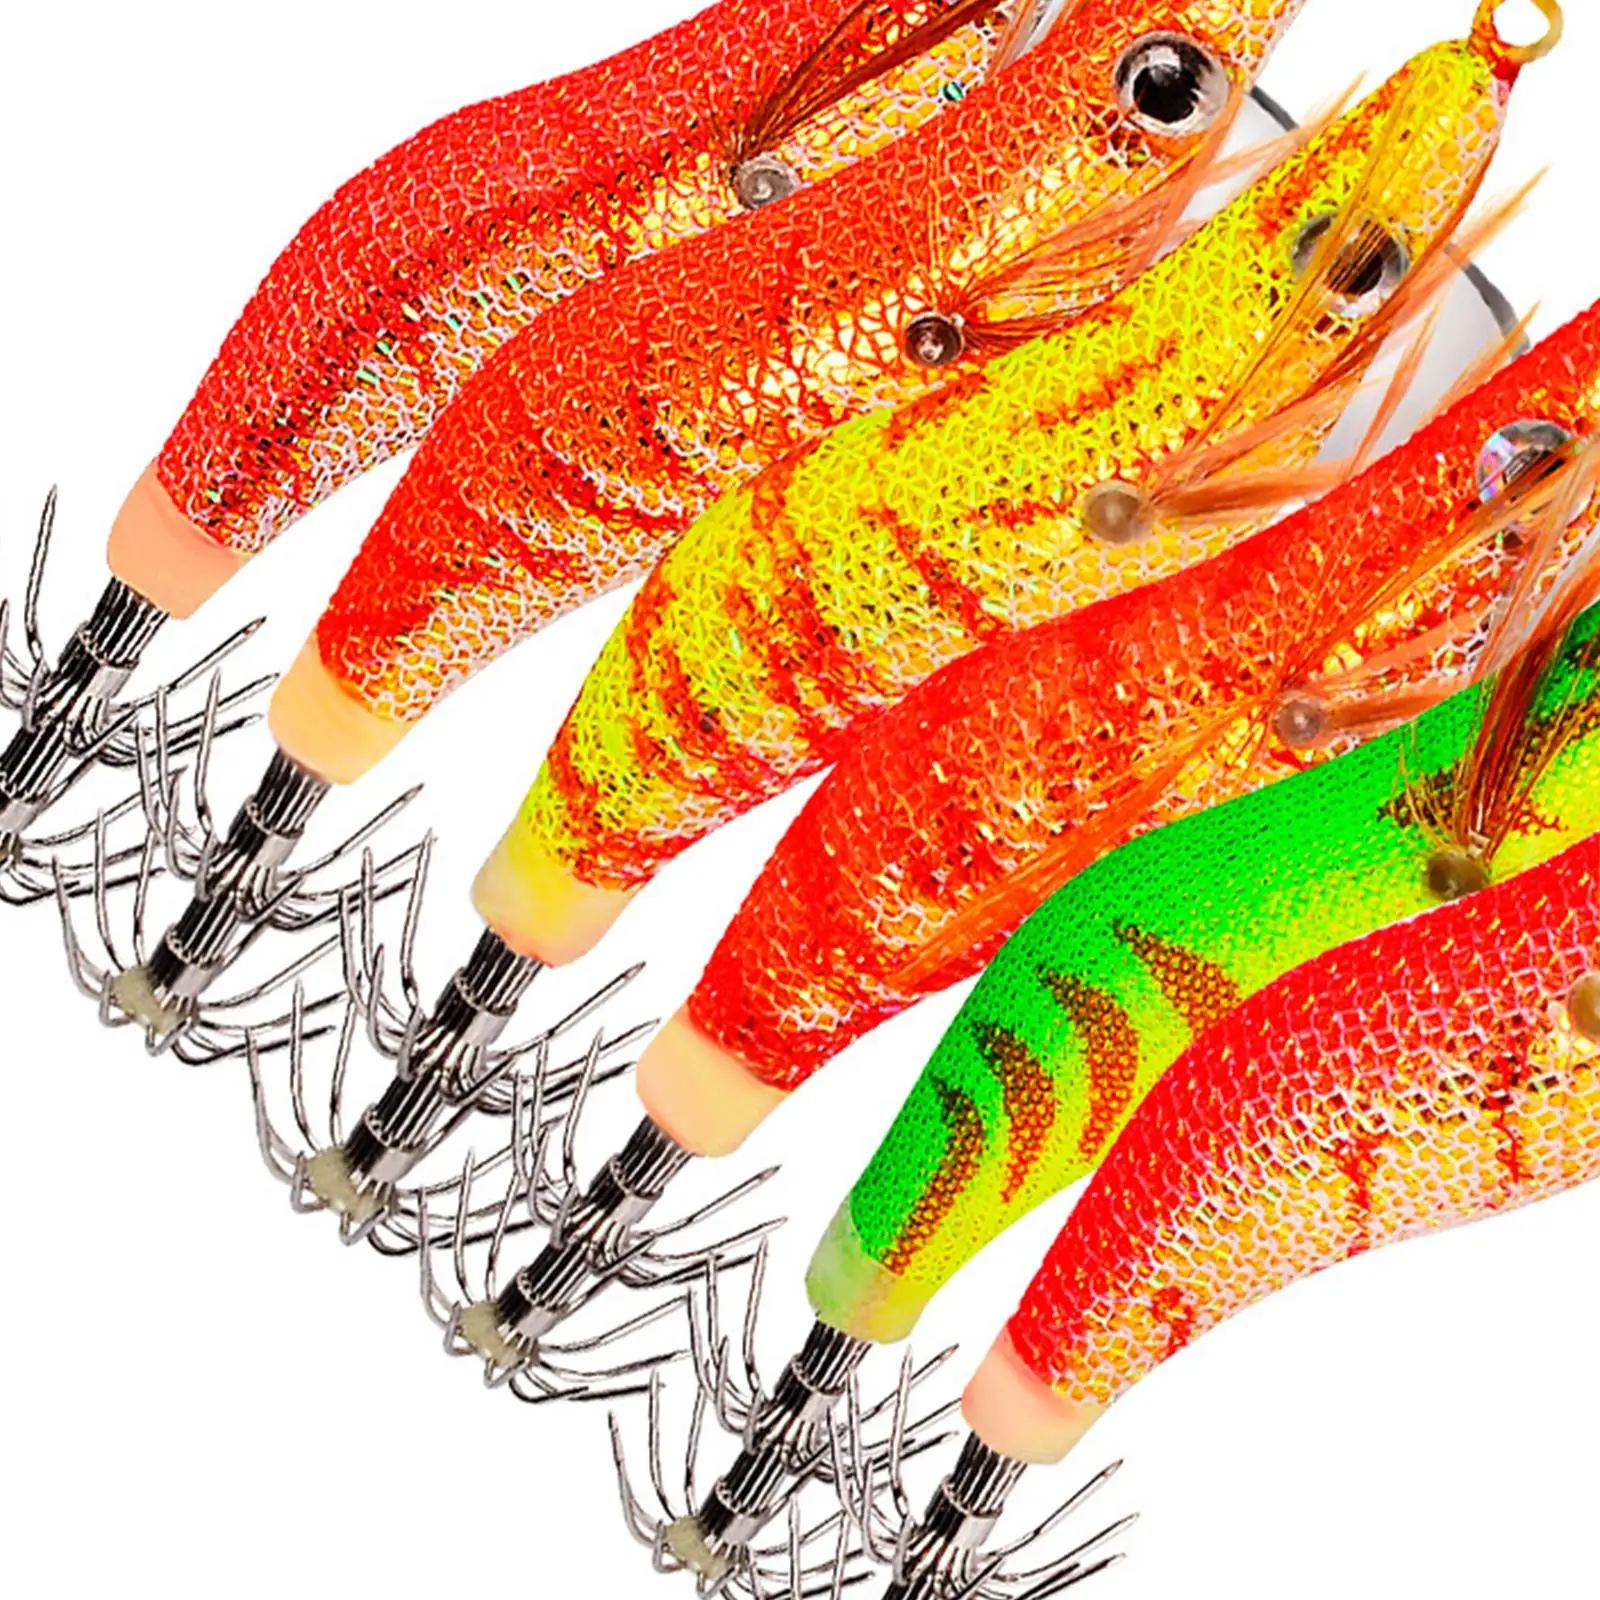 6 Pieces Squid Jig Hooks 3D Eyes Prawn Lures Fish Hook for Octopus Freshwater Fishing Cuttlefish Squid Fishing Sea Fishing